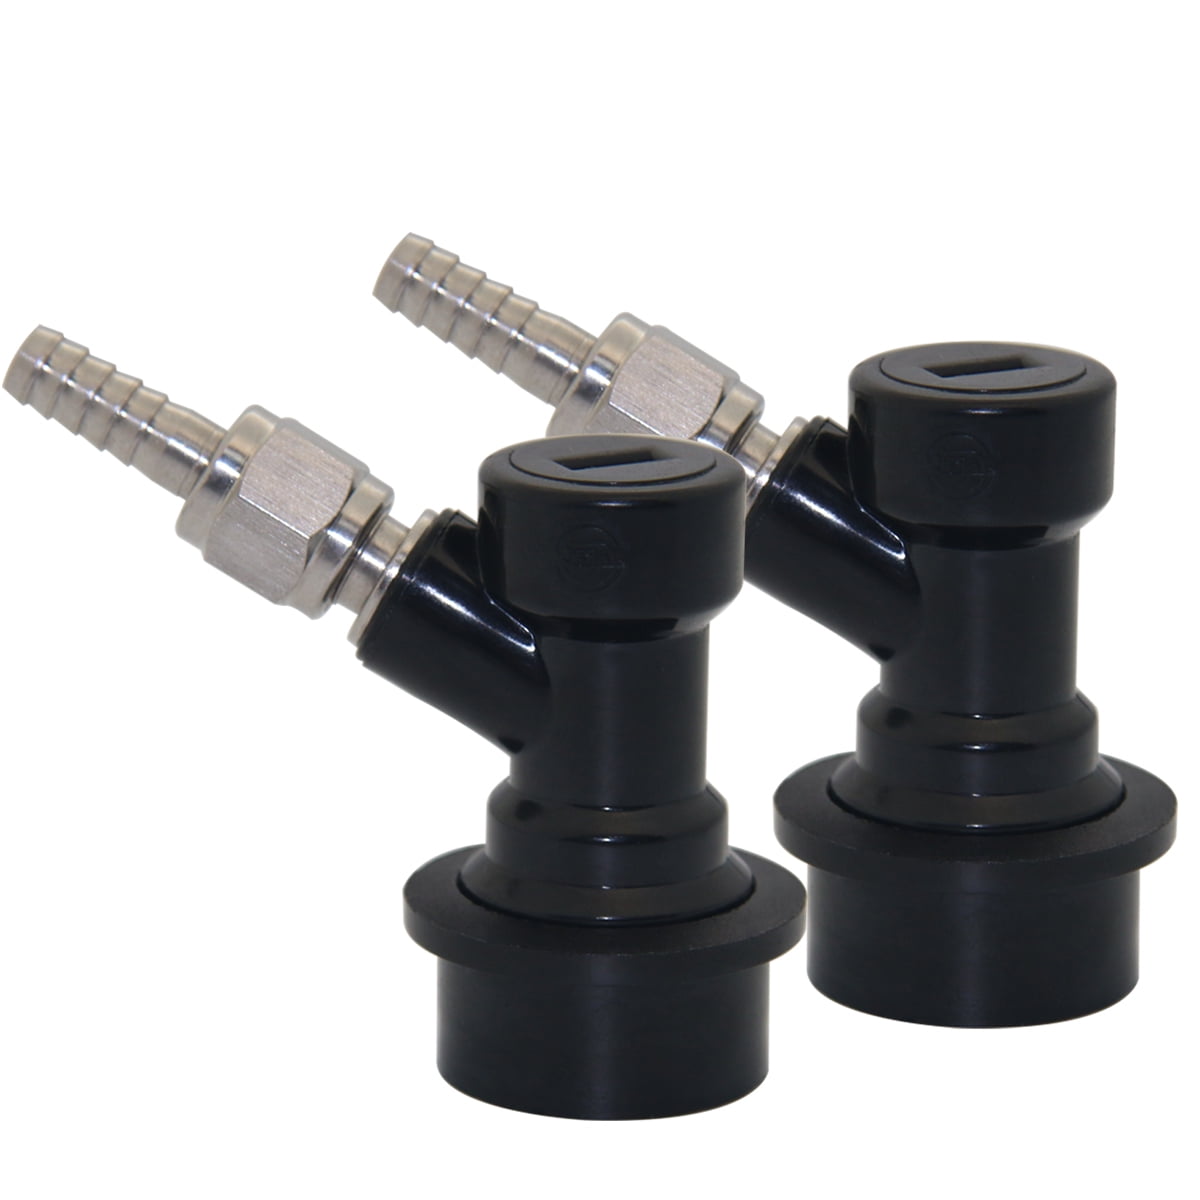 Stainless Steel Ball Lock Disconnect Set with 1/4" Swivel Nuts for Beer kegs 